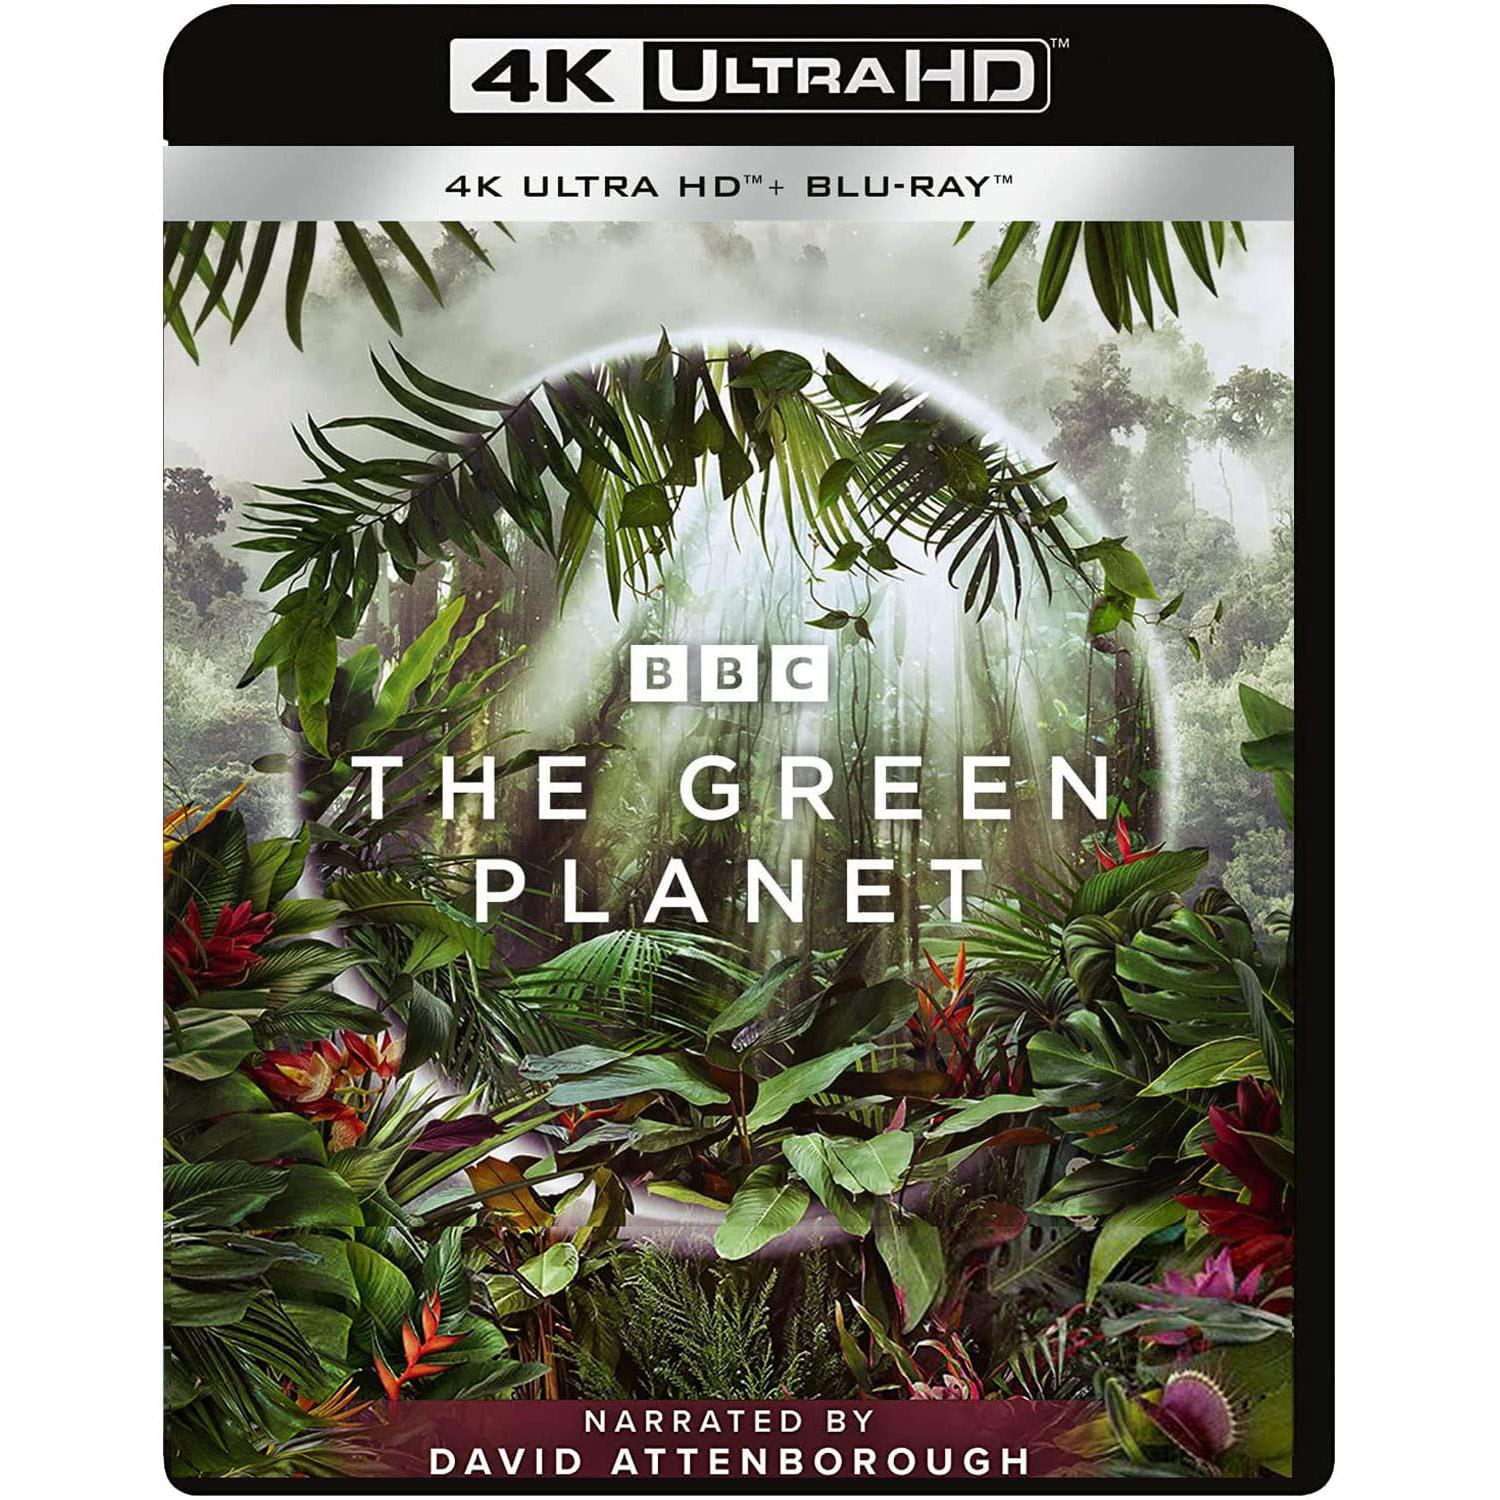 BBC Earth The Green Planet Blu-ray for $34.95 Shipped